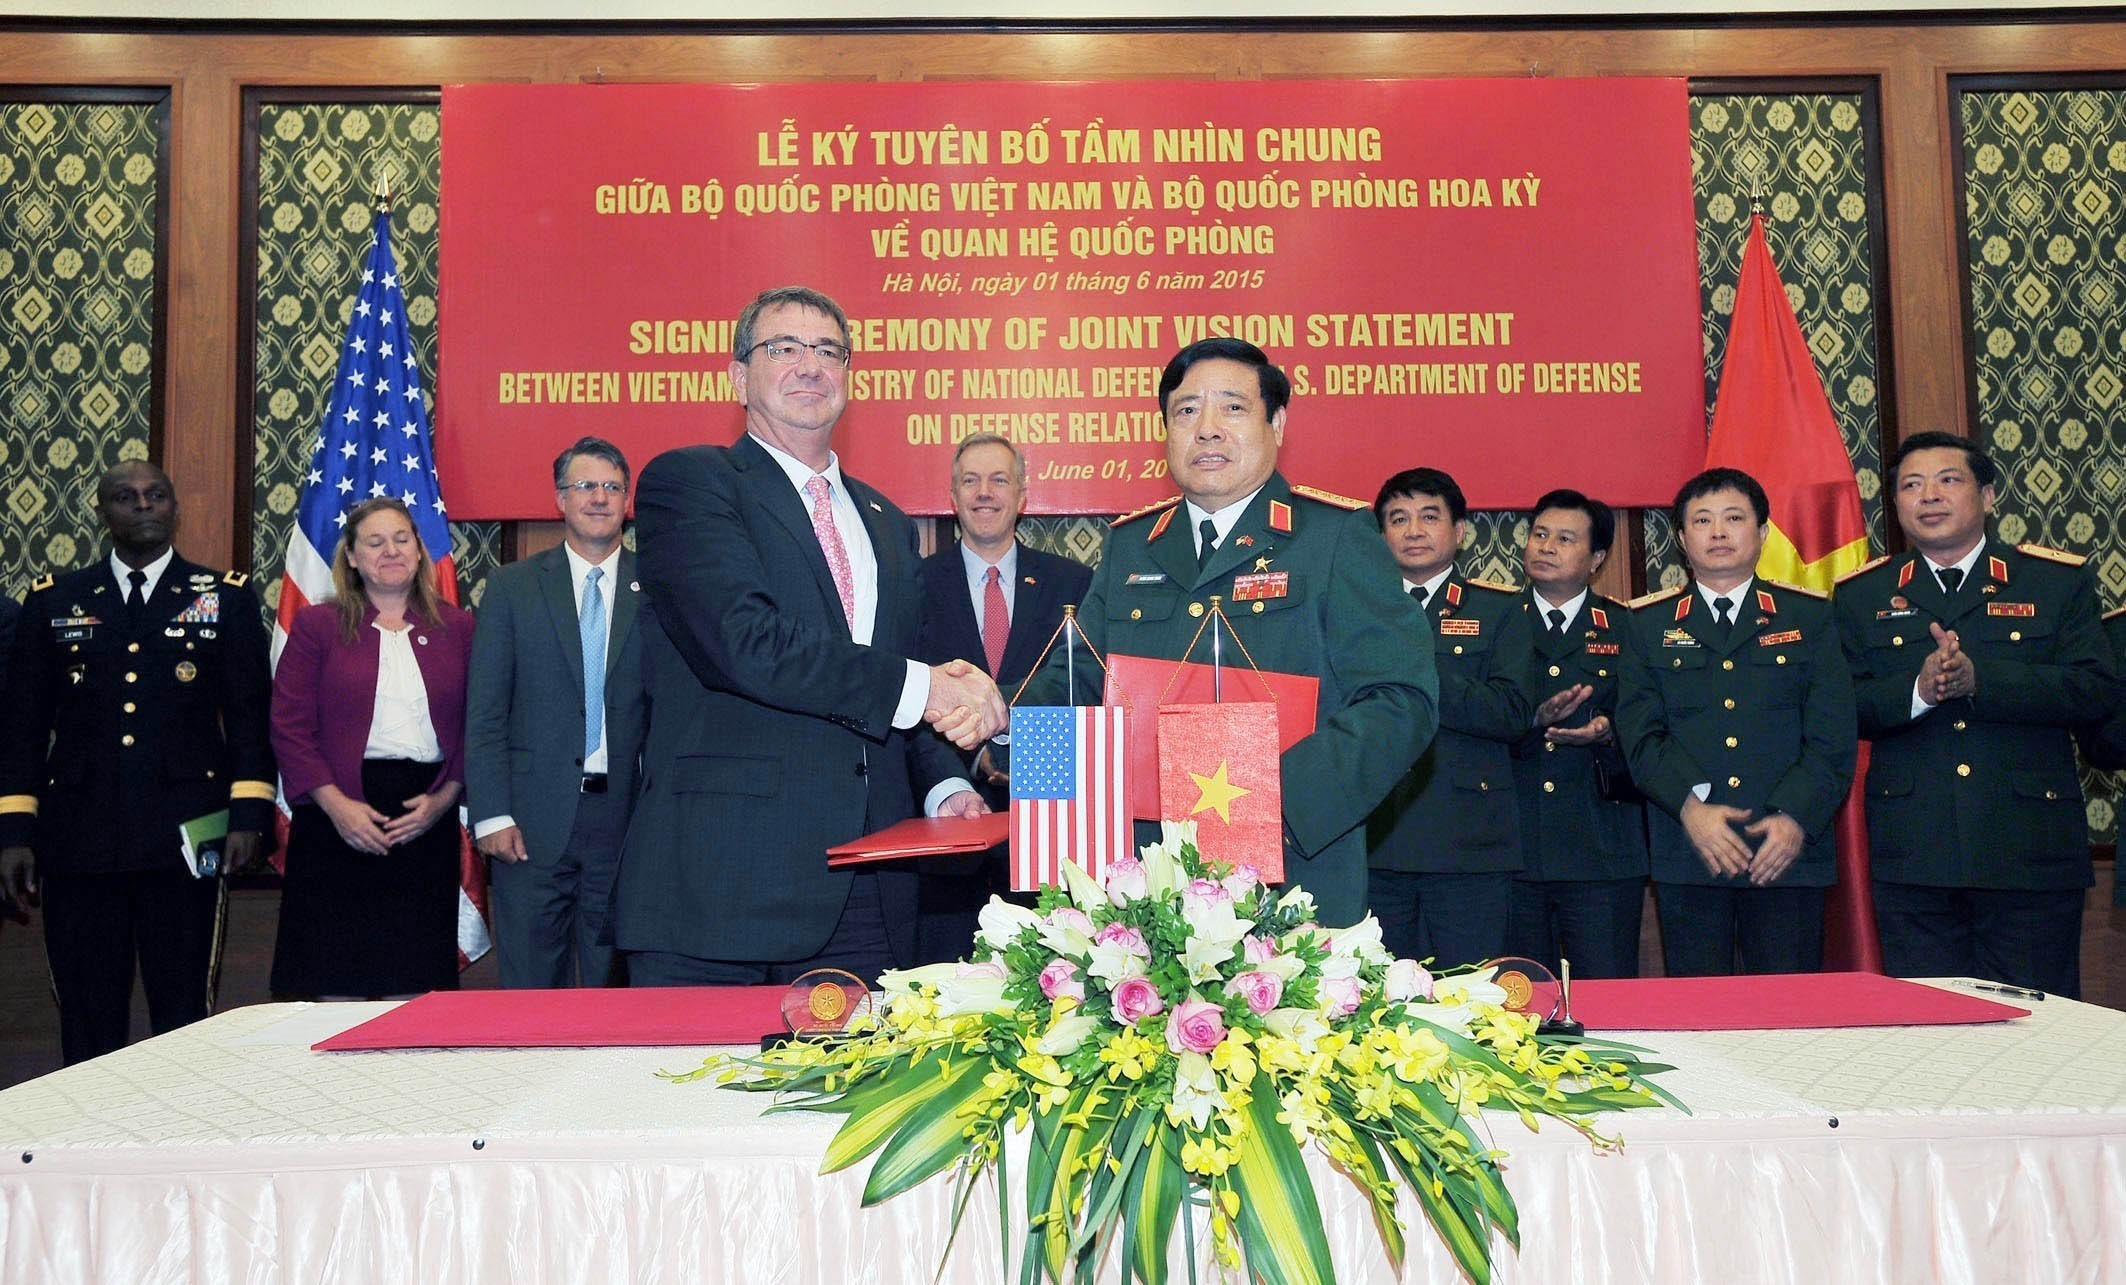 Defence Secretary Ashton Carter and Defence Minister Phung Quang Thanh exchange the signed Vietnam-US Joint Vision Statement on Defence Relations in Hanoi on June 1, 2015 during the former’s official trip to Vietnam. (Photo: VNA)